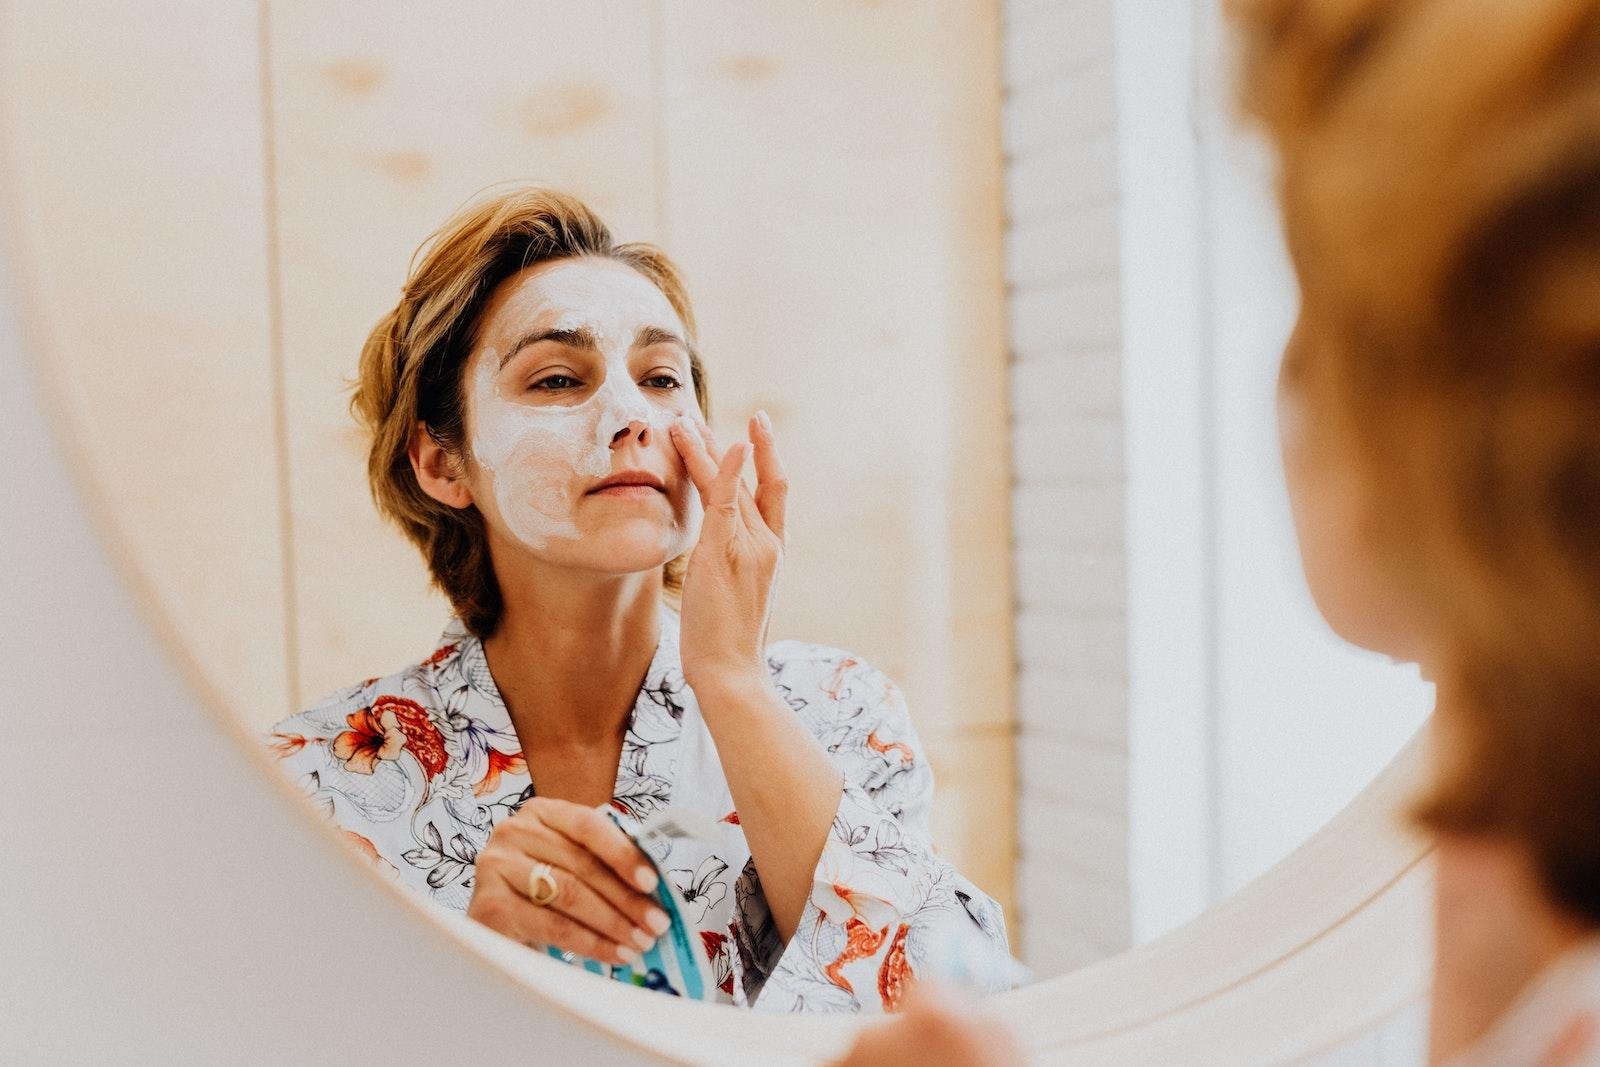 Woman Applying bakuchiol Mask on Her Face in Front of a Mirror